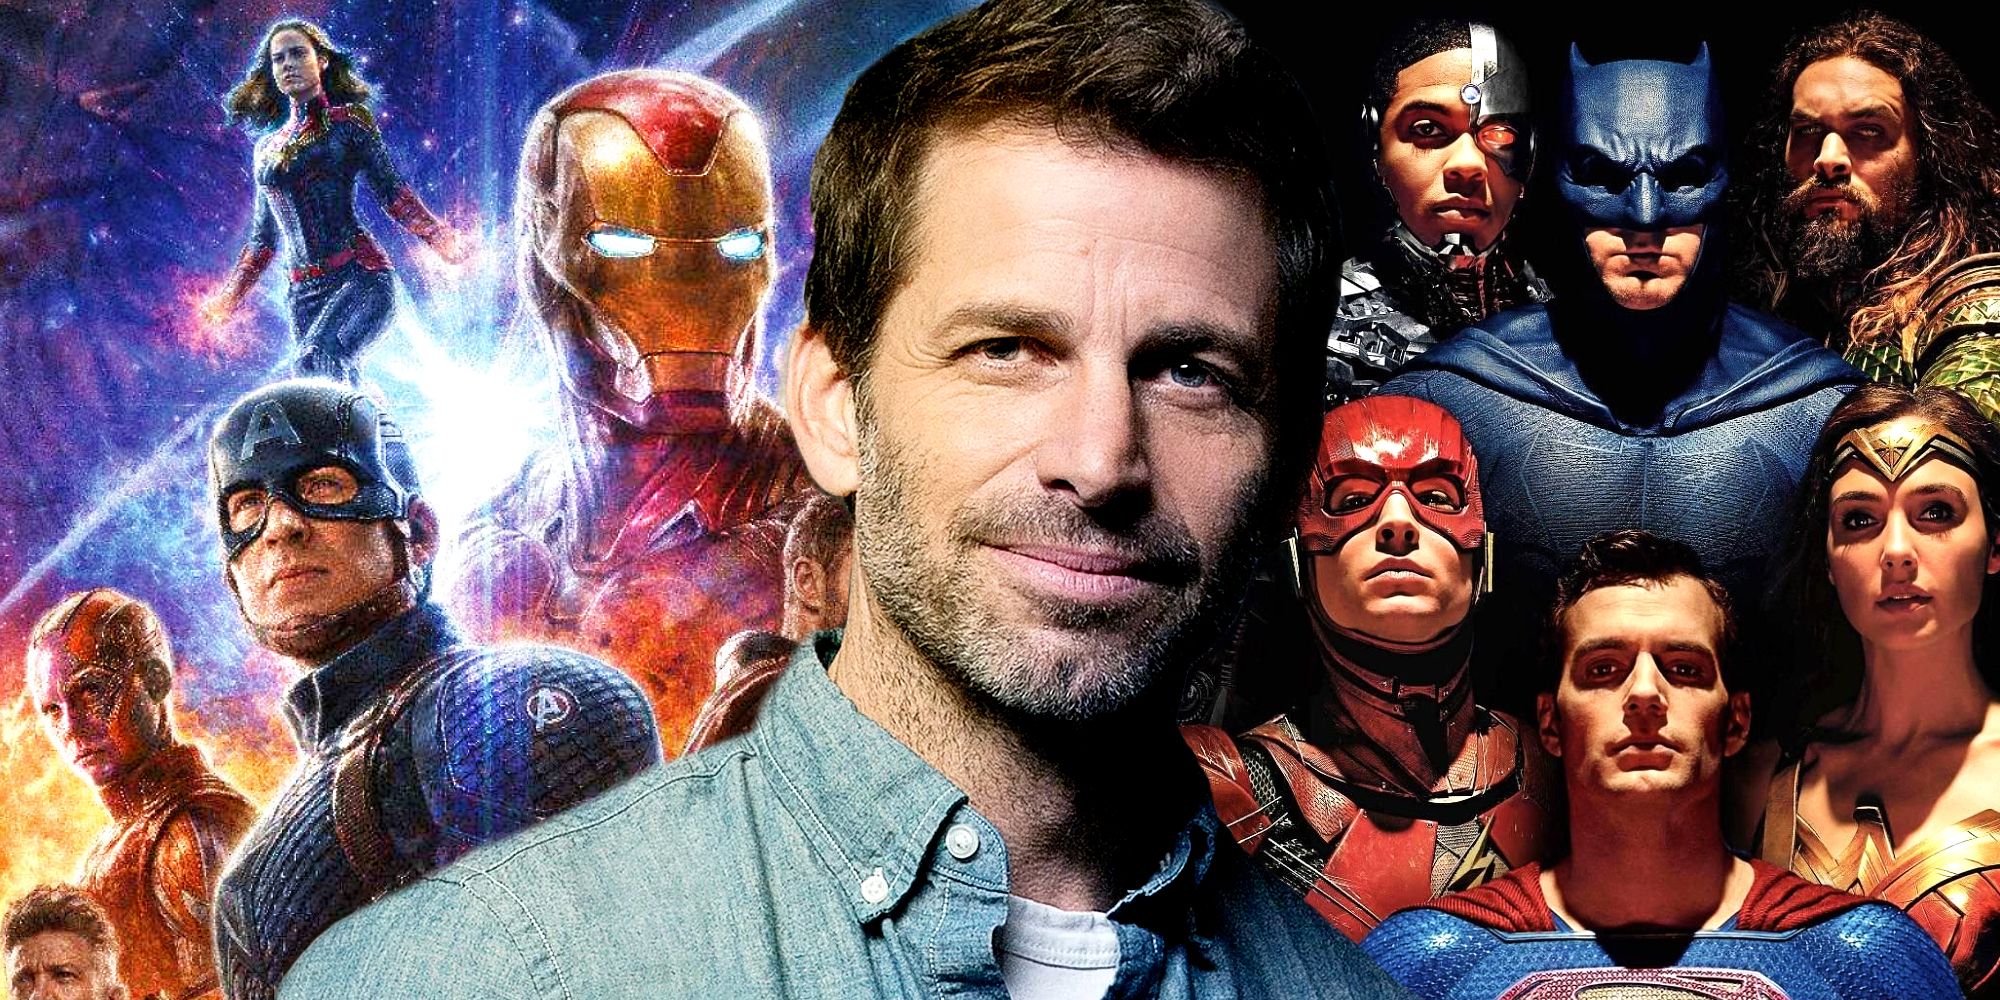 DCEU Zack Snyder's Justice League and MCU Avengers Endgame